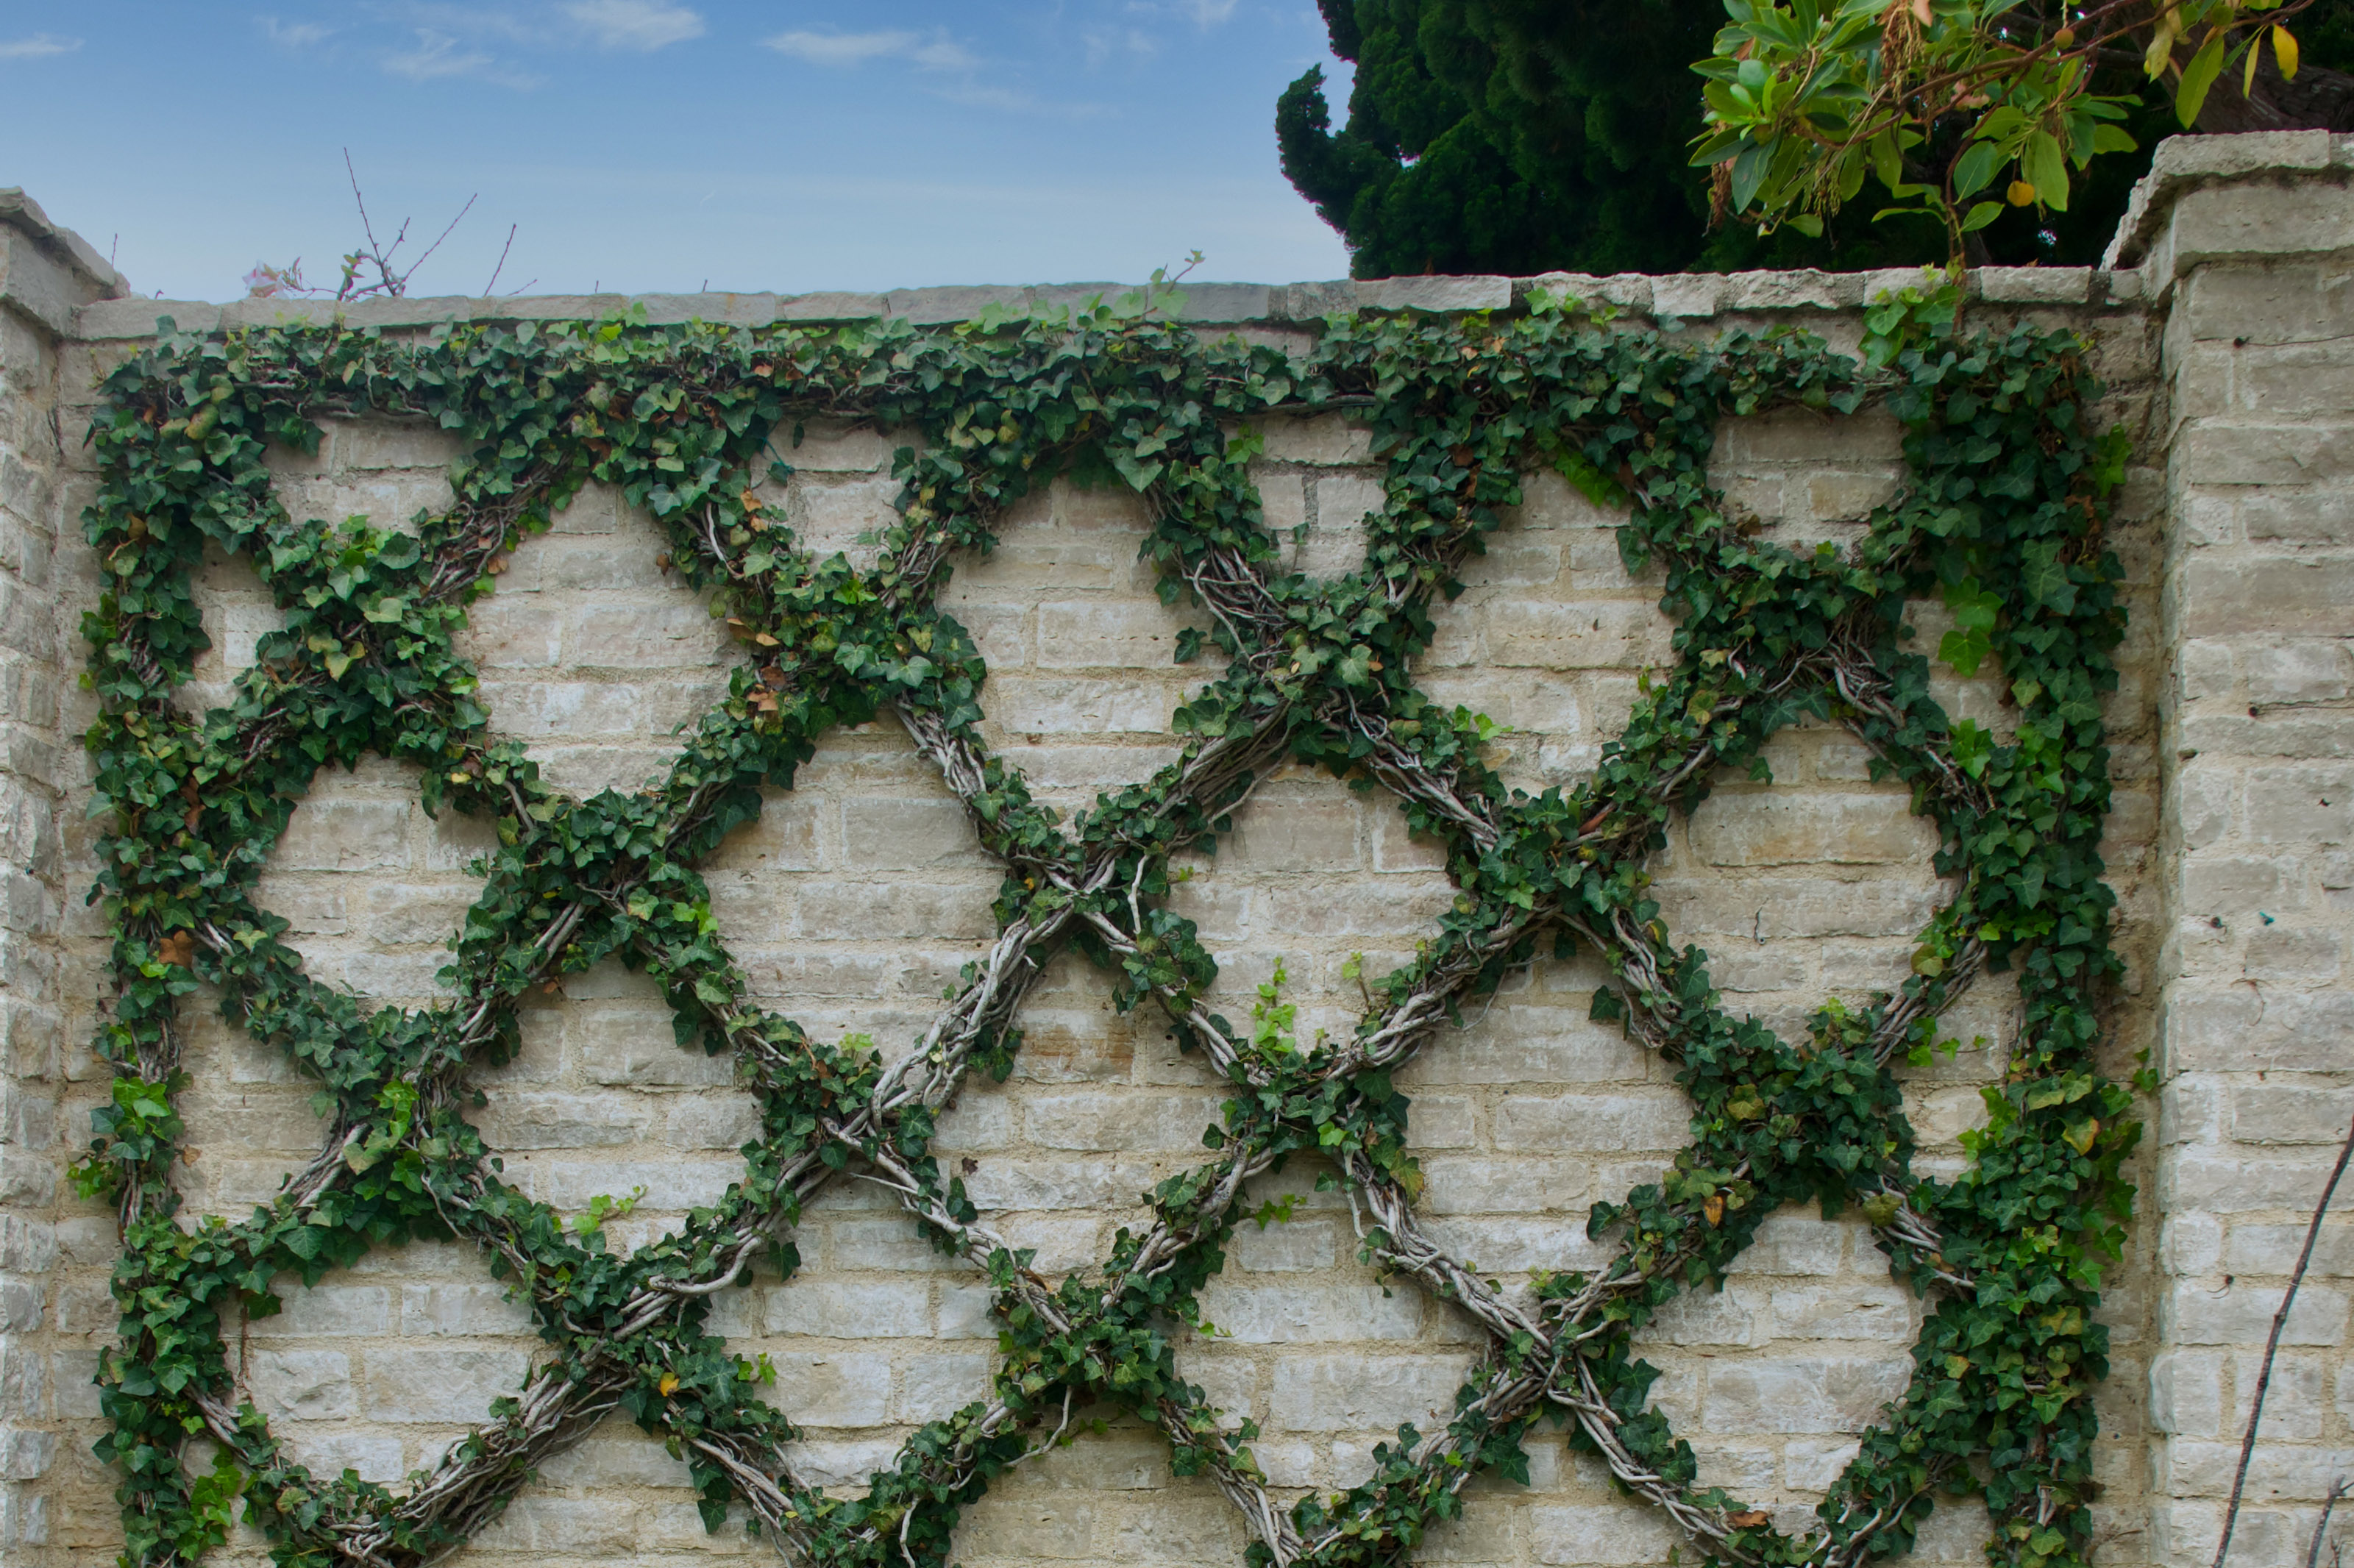 Ivy covered espalier in a crisscross pattern on a block wall